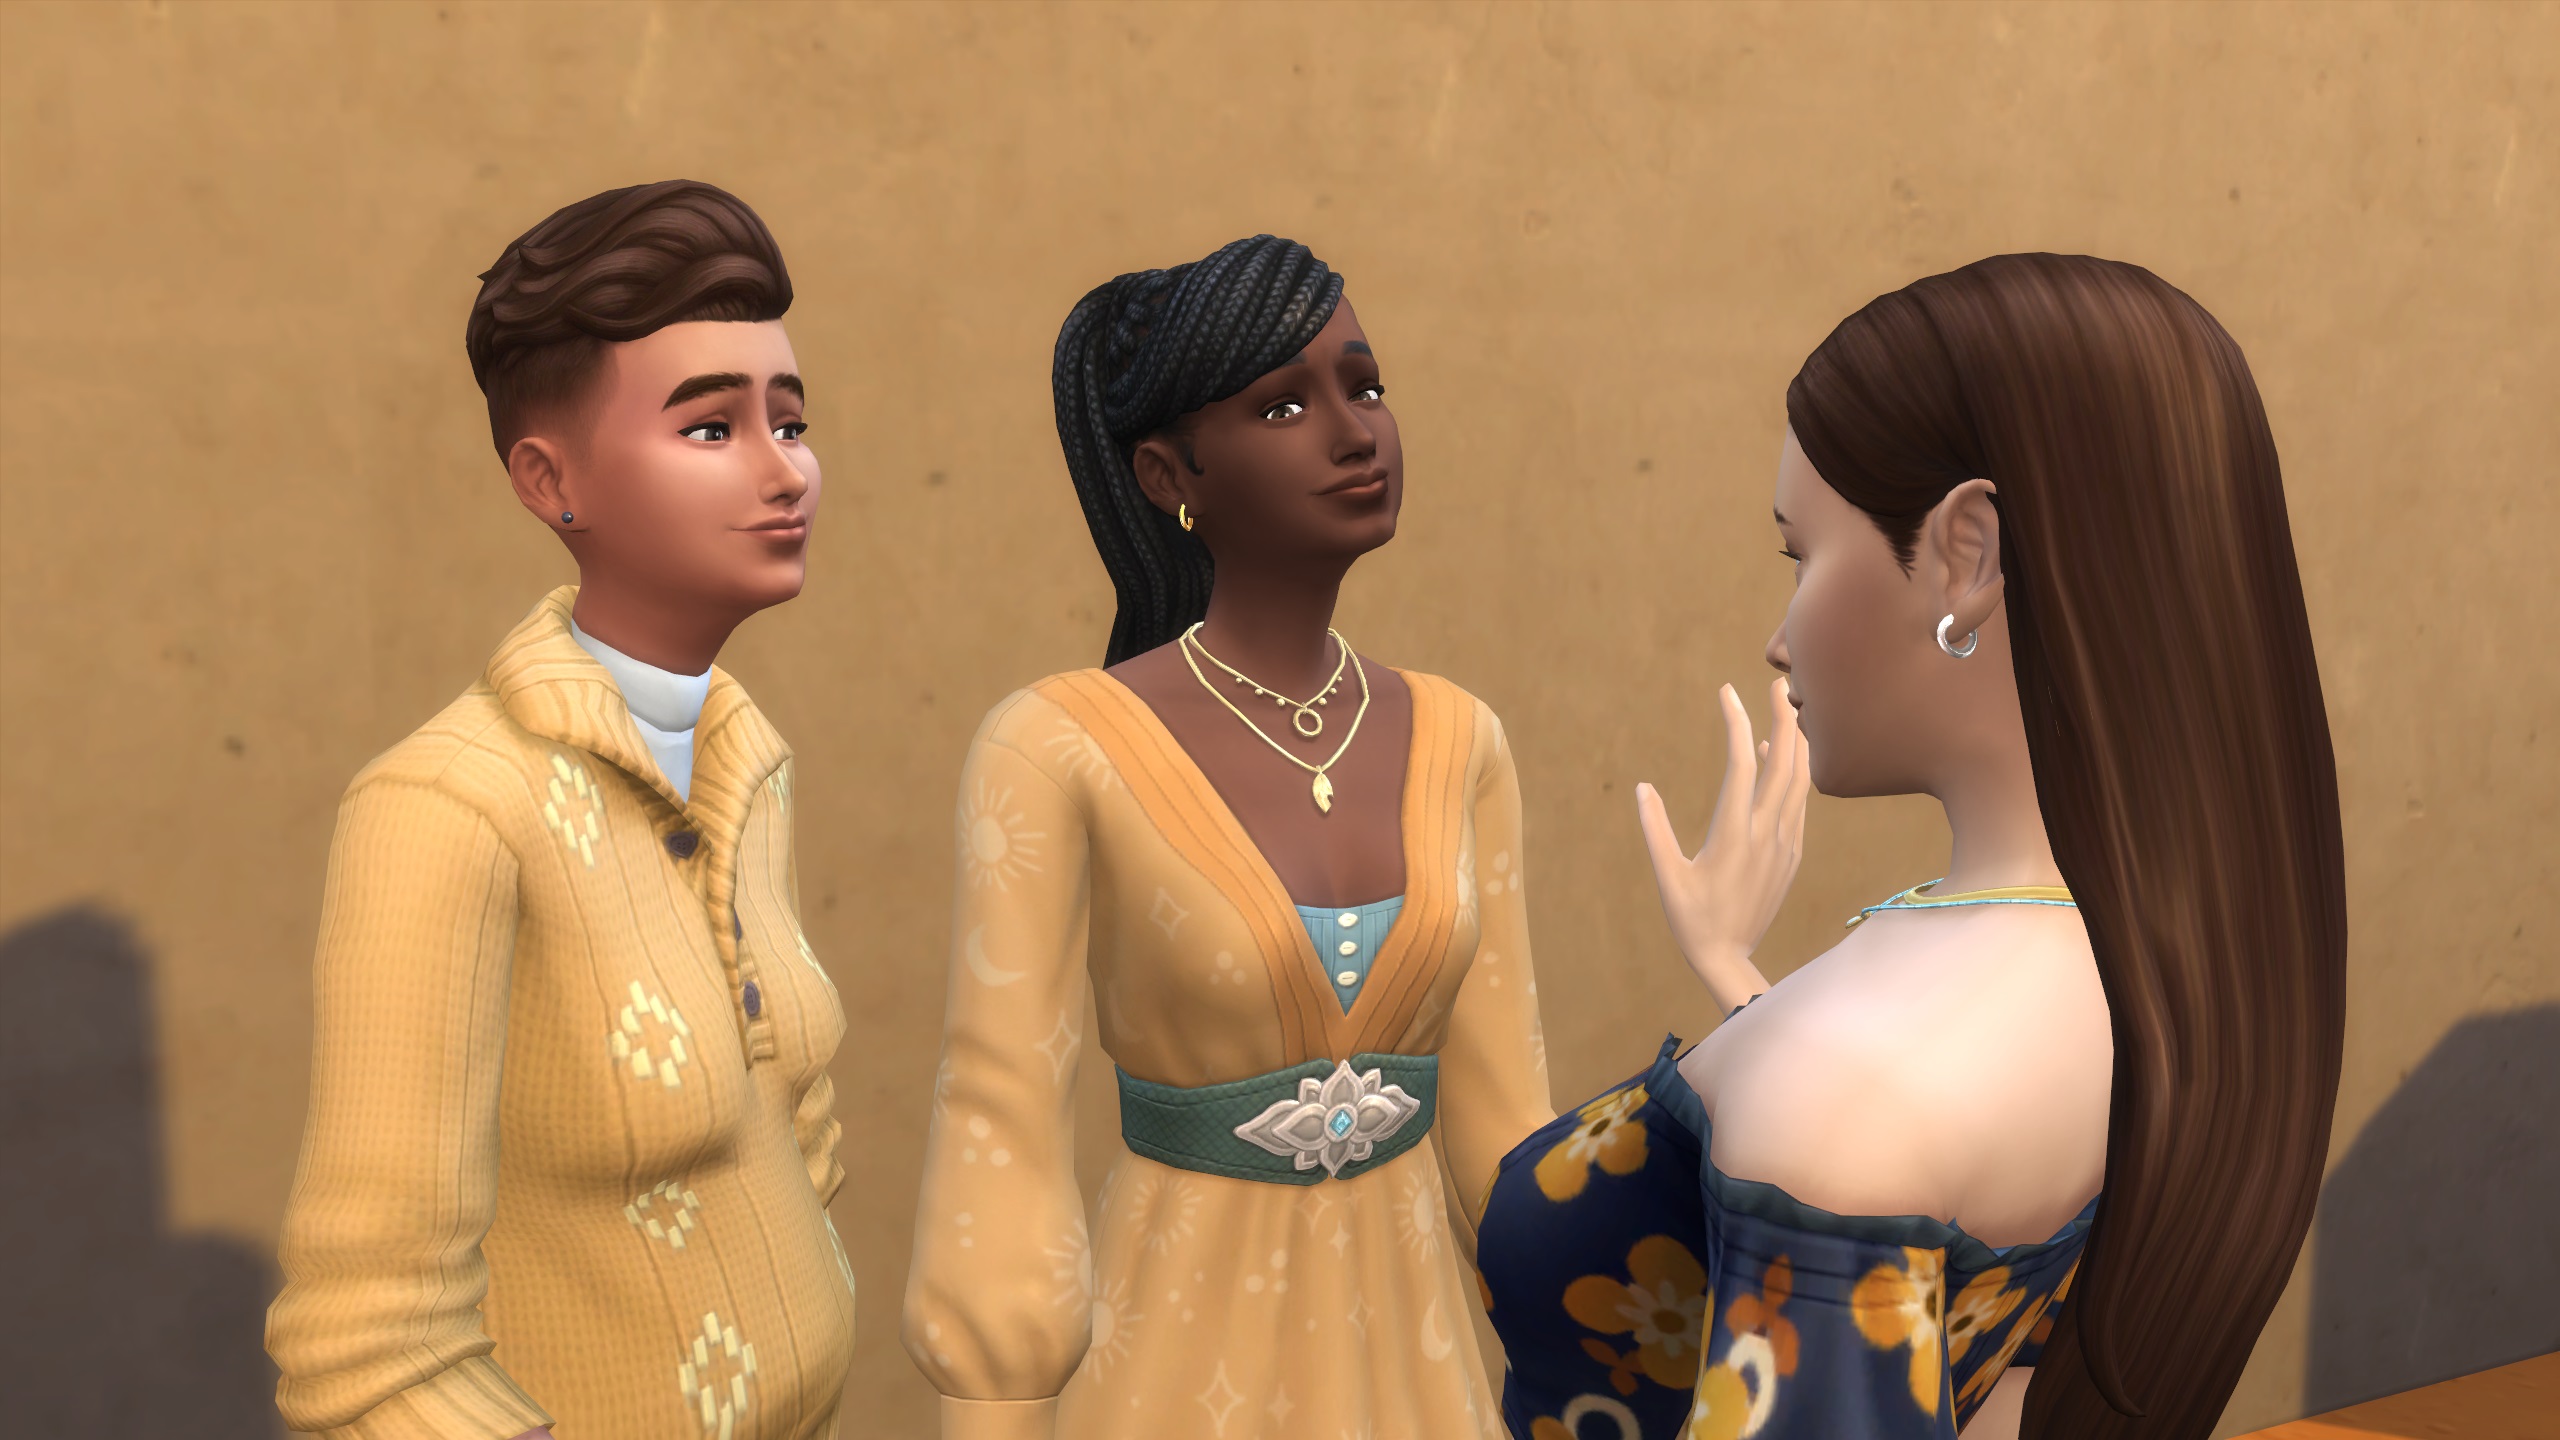 The Sims 4 - three Sims talk together in a close conversation